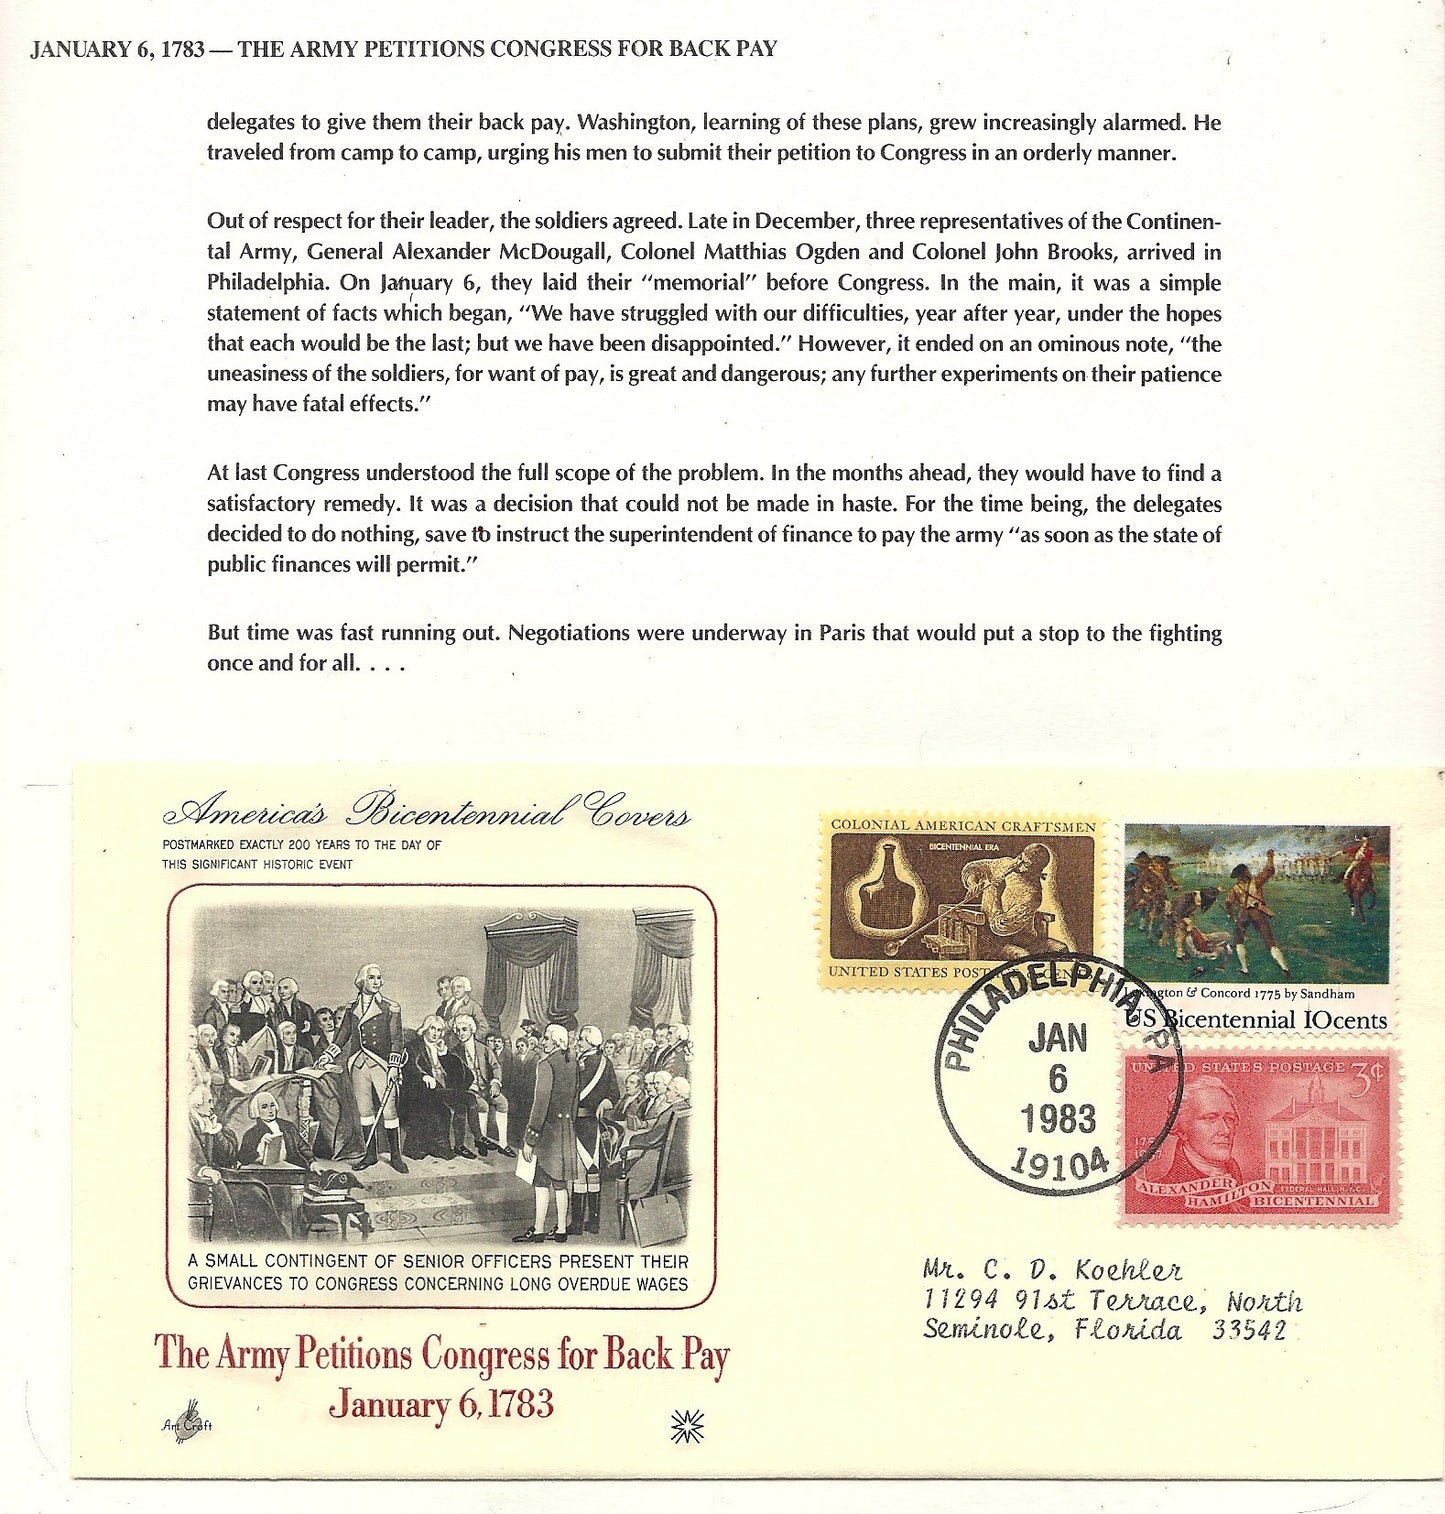 01 06 1986 FDC WH Army Petitions Congress for Back Pay